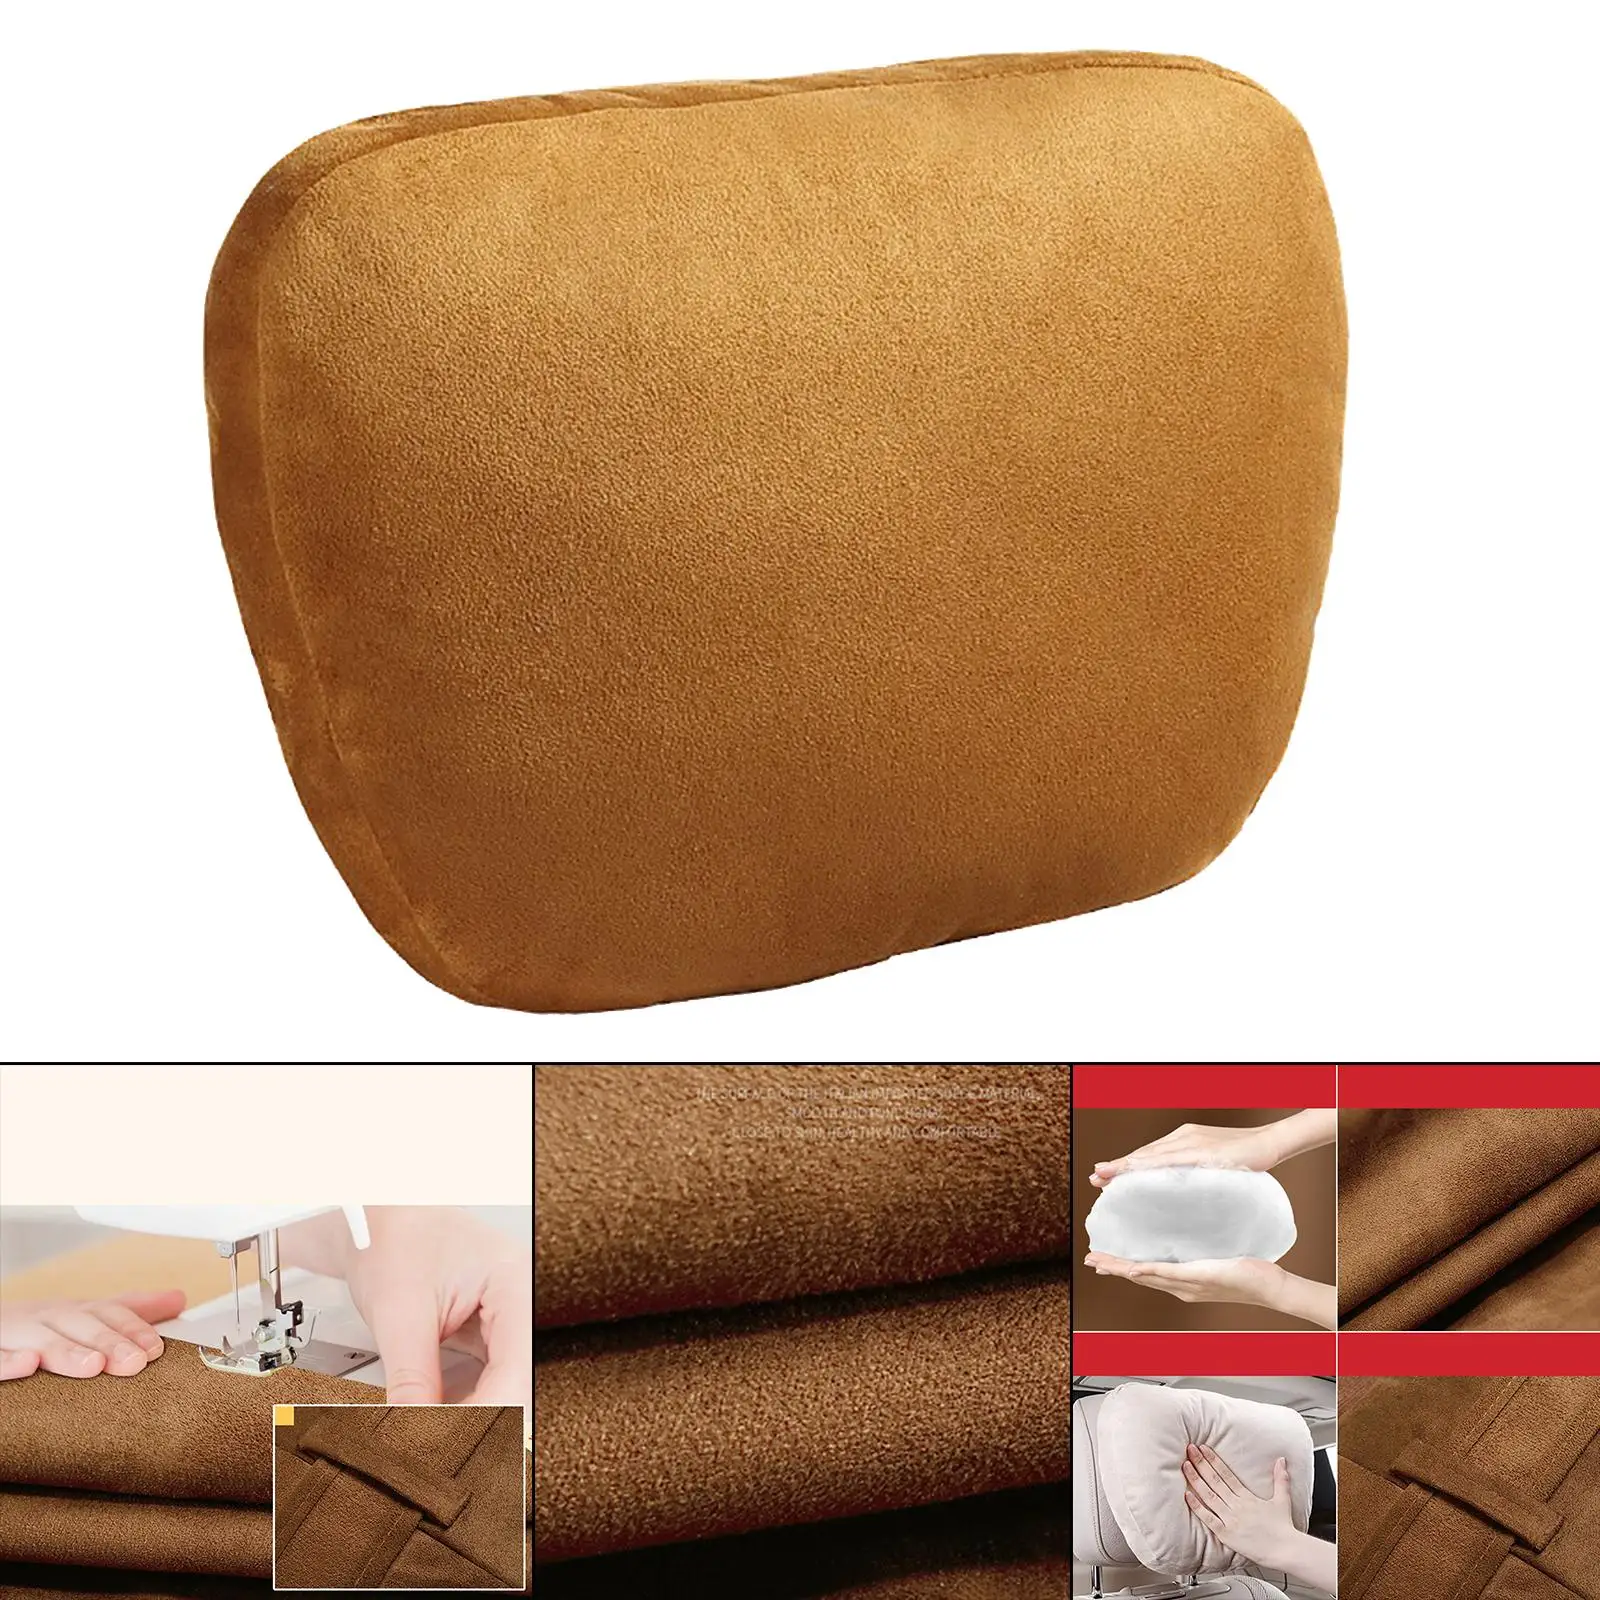 Car Headrest Down Cotton Removable Relieve Neck Pain Adjustable Soft Neck Rest  Fit for Travelling Gaming Resting Home